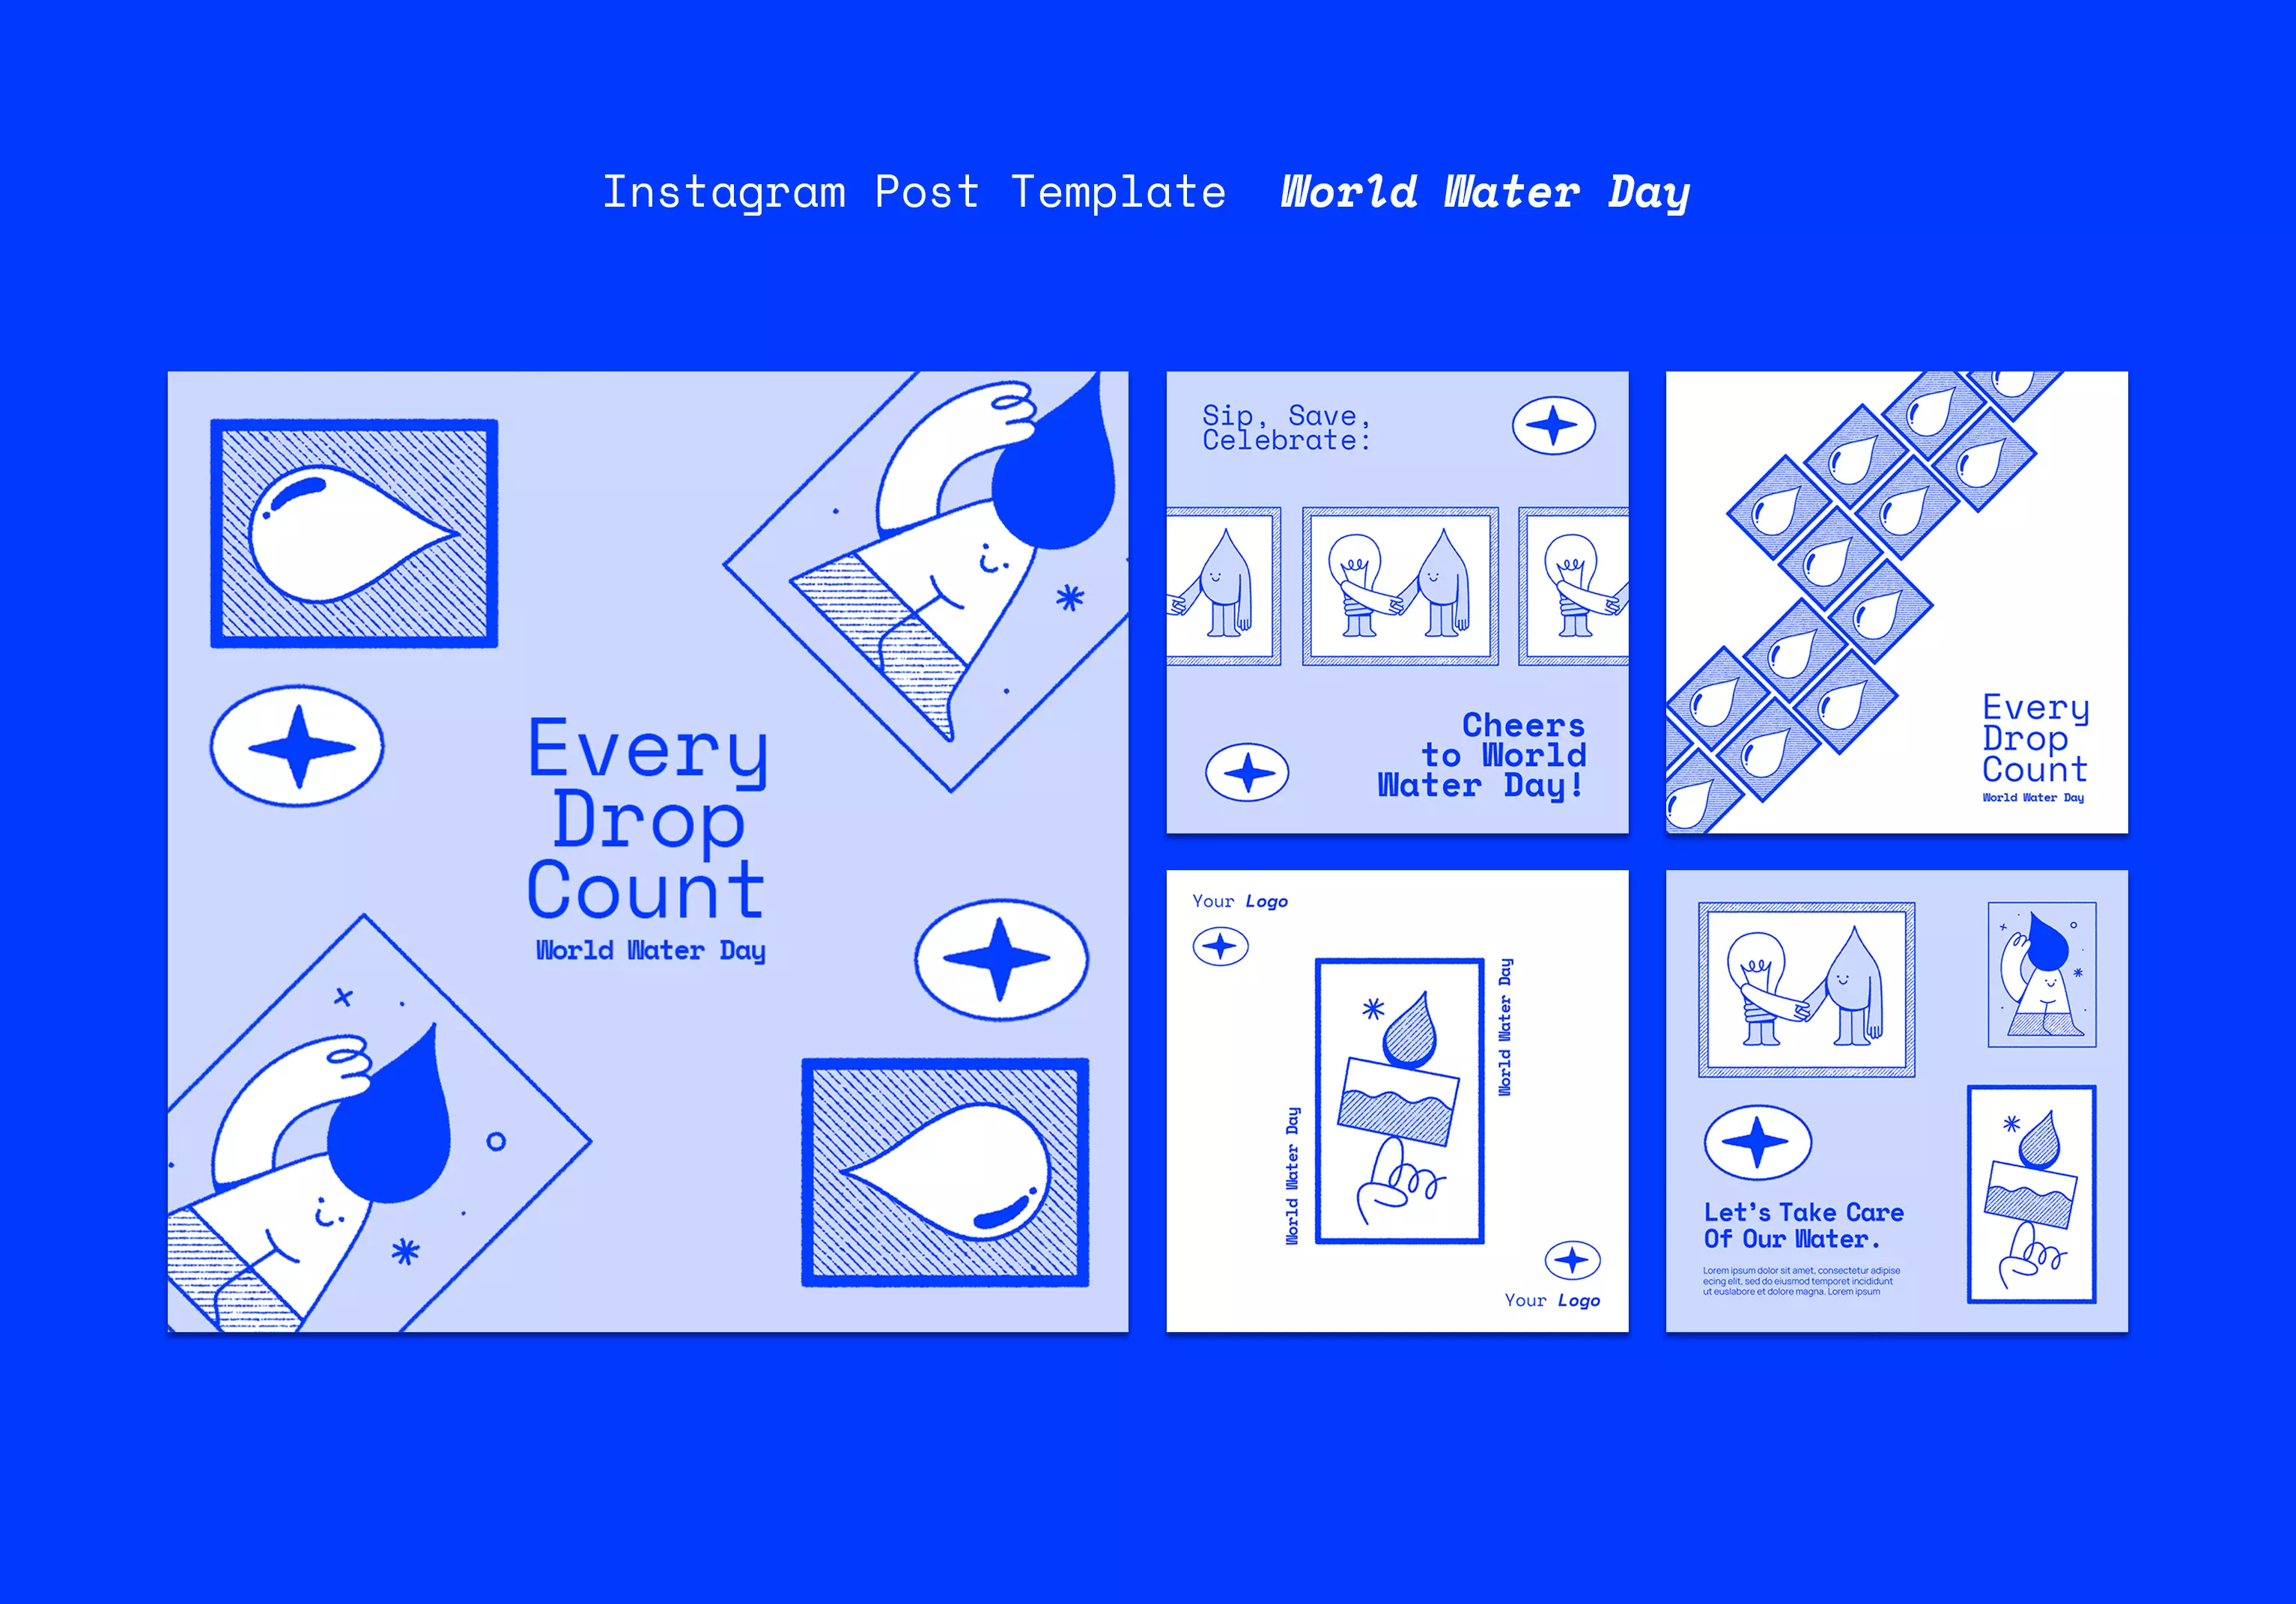 An Instagram template with a complete concept for World Water Day 